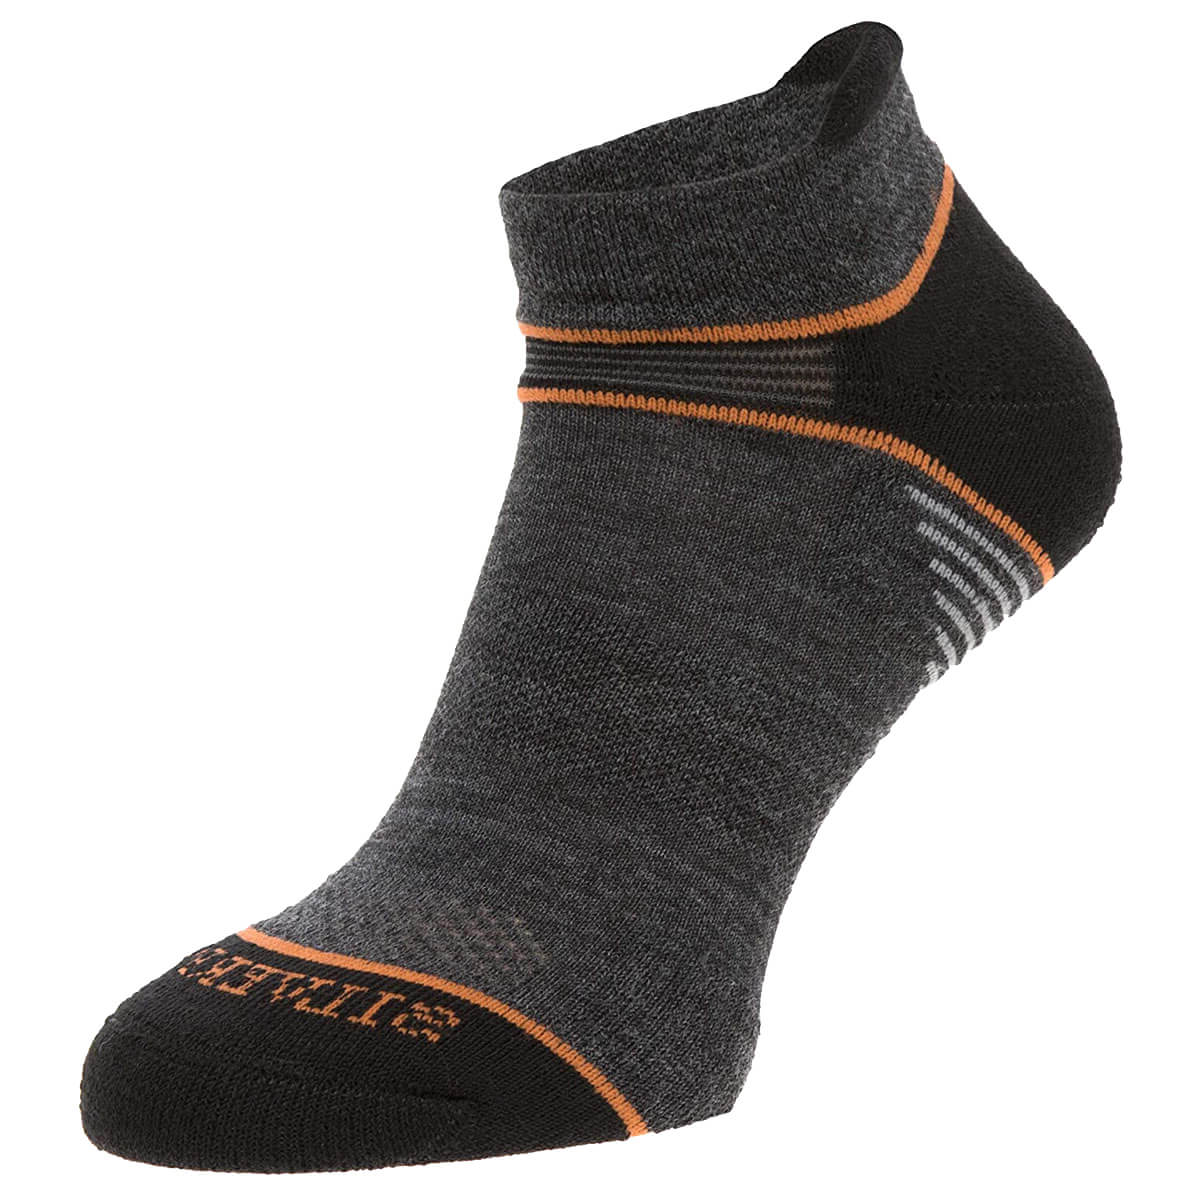 Silverpoint On the Move Merino Wool Ankle Socks - John Bull Clothing